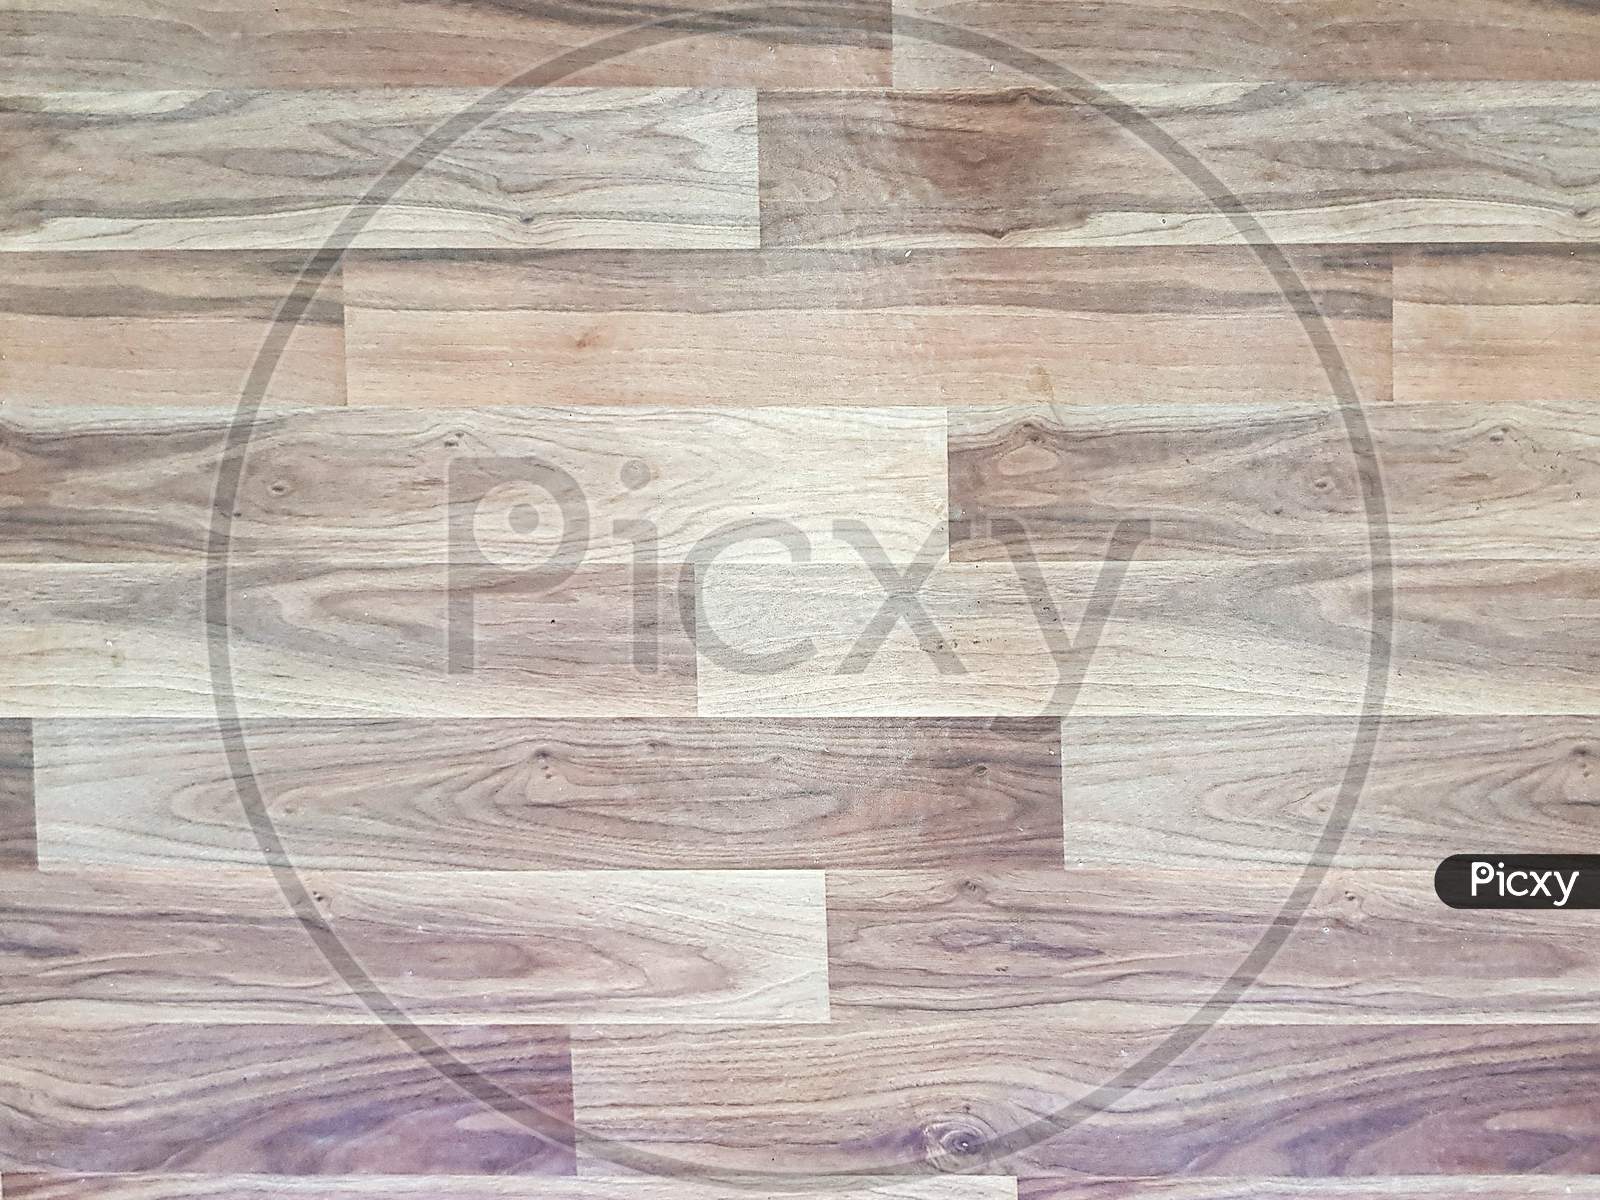 abstract tile monochrome pattern background wooden  texture  image.